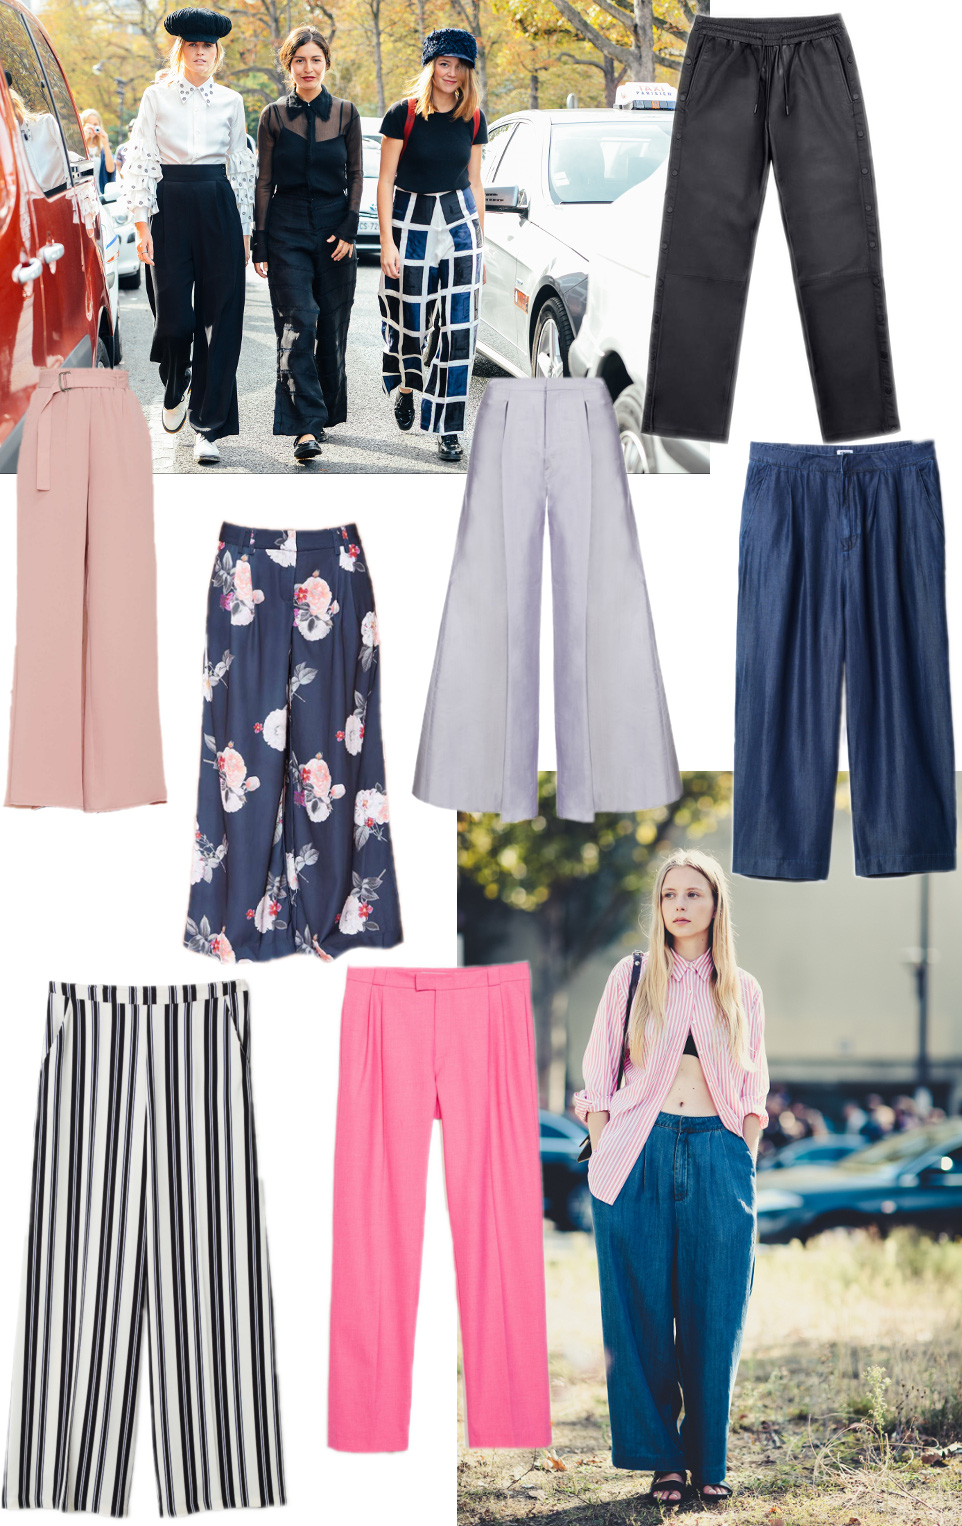 trousers collage photo by tommy ton for style.com and marie jensen show by victoria adamson wide leg